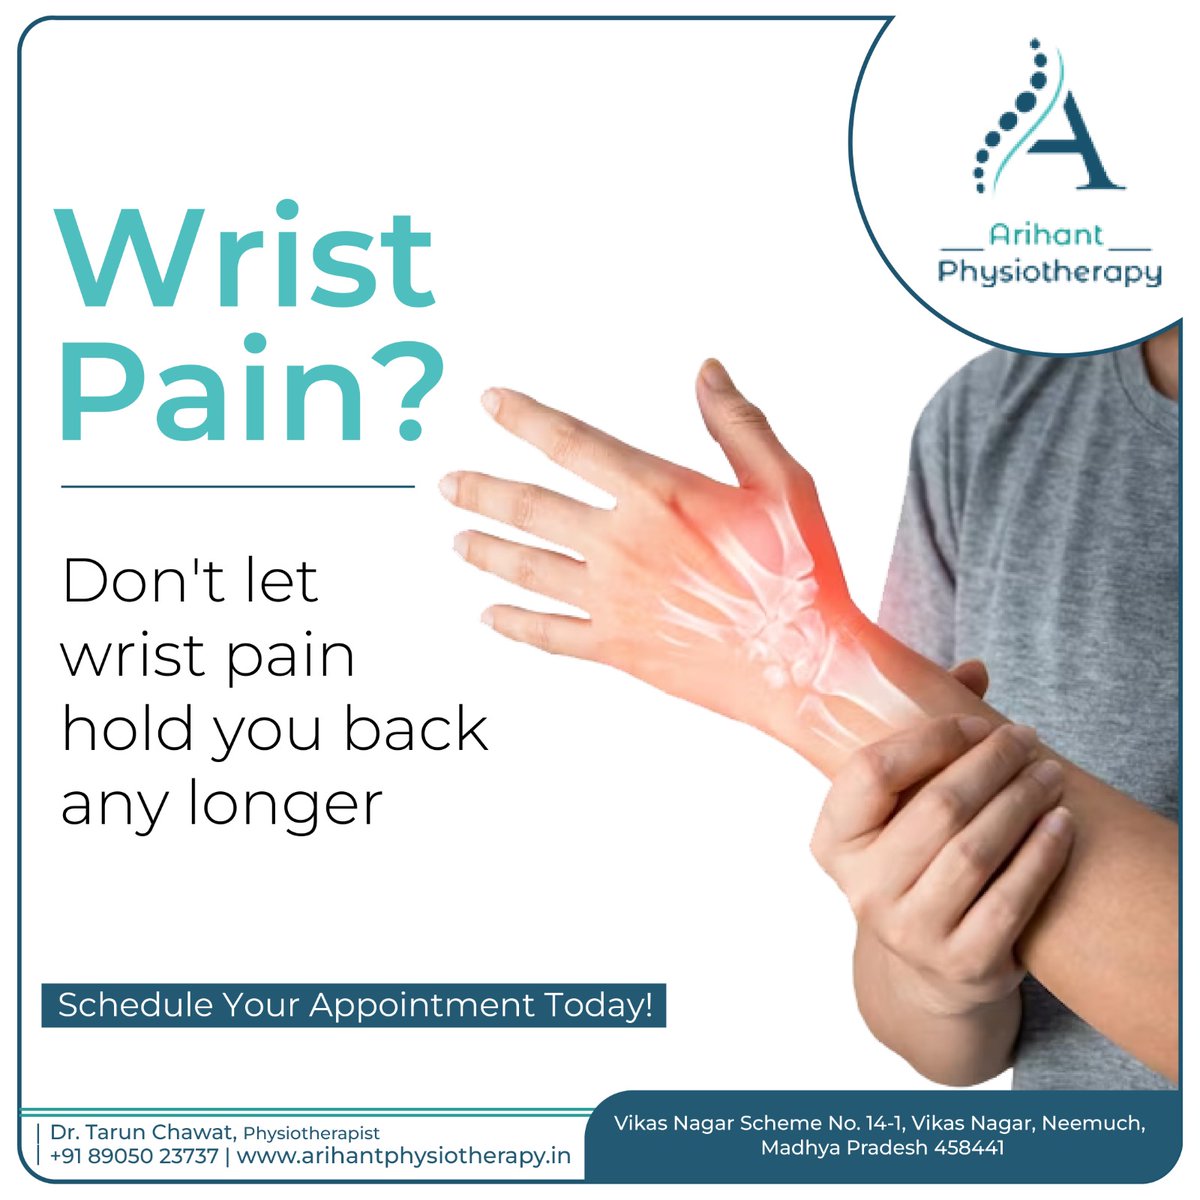 Wrist Pain?
Don't let wrist pain hold you back any longer – schedule your appointment today!

#Arihantphysiotherapy #WristPainRelief #WristHealth #HandAndWristCare #WristMobility #WristExercises #PainFreeWrist #WristFlexibility #JointHealth #PhysicalTherapy #PainManagement